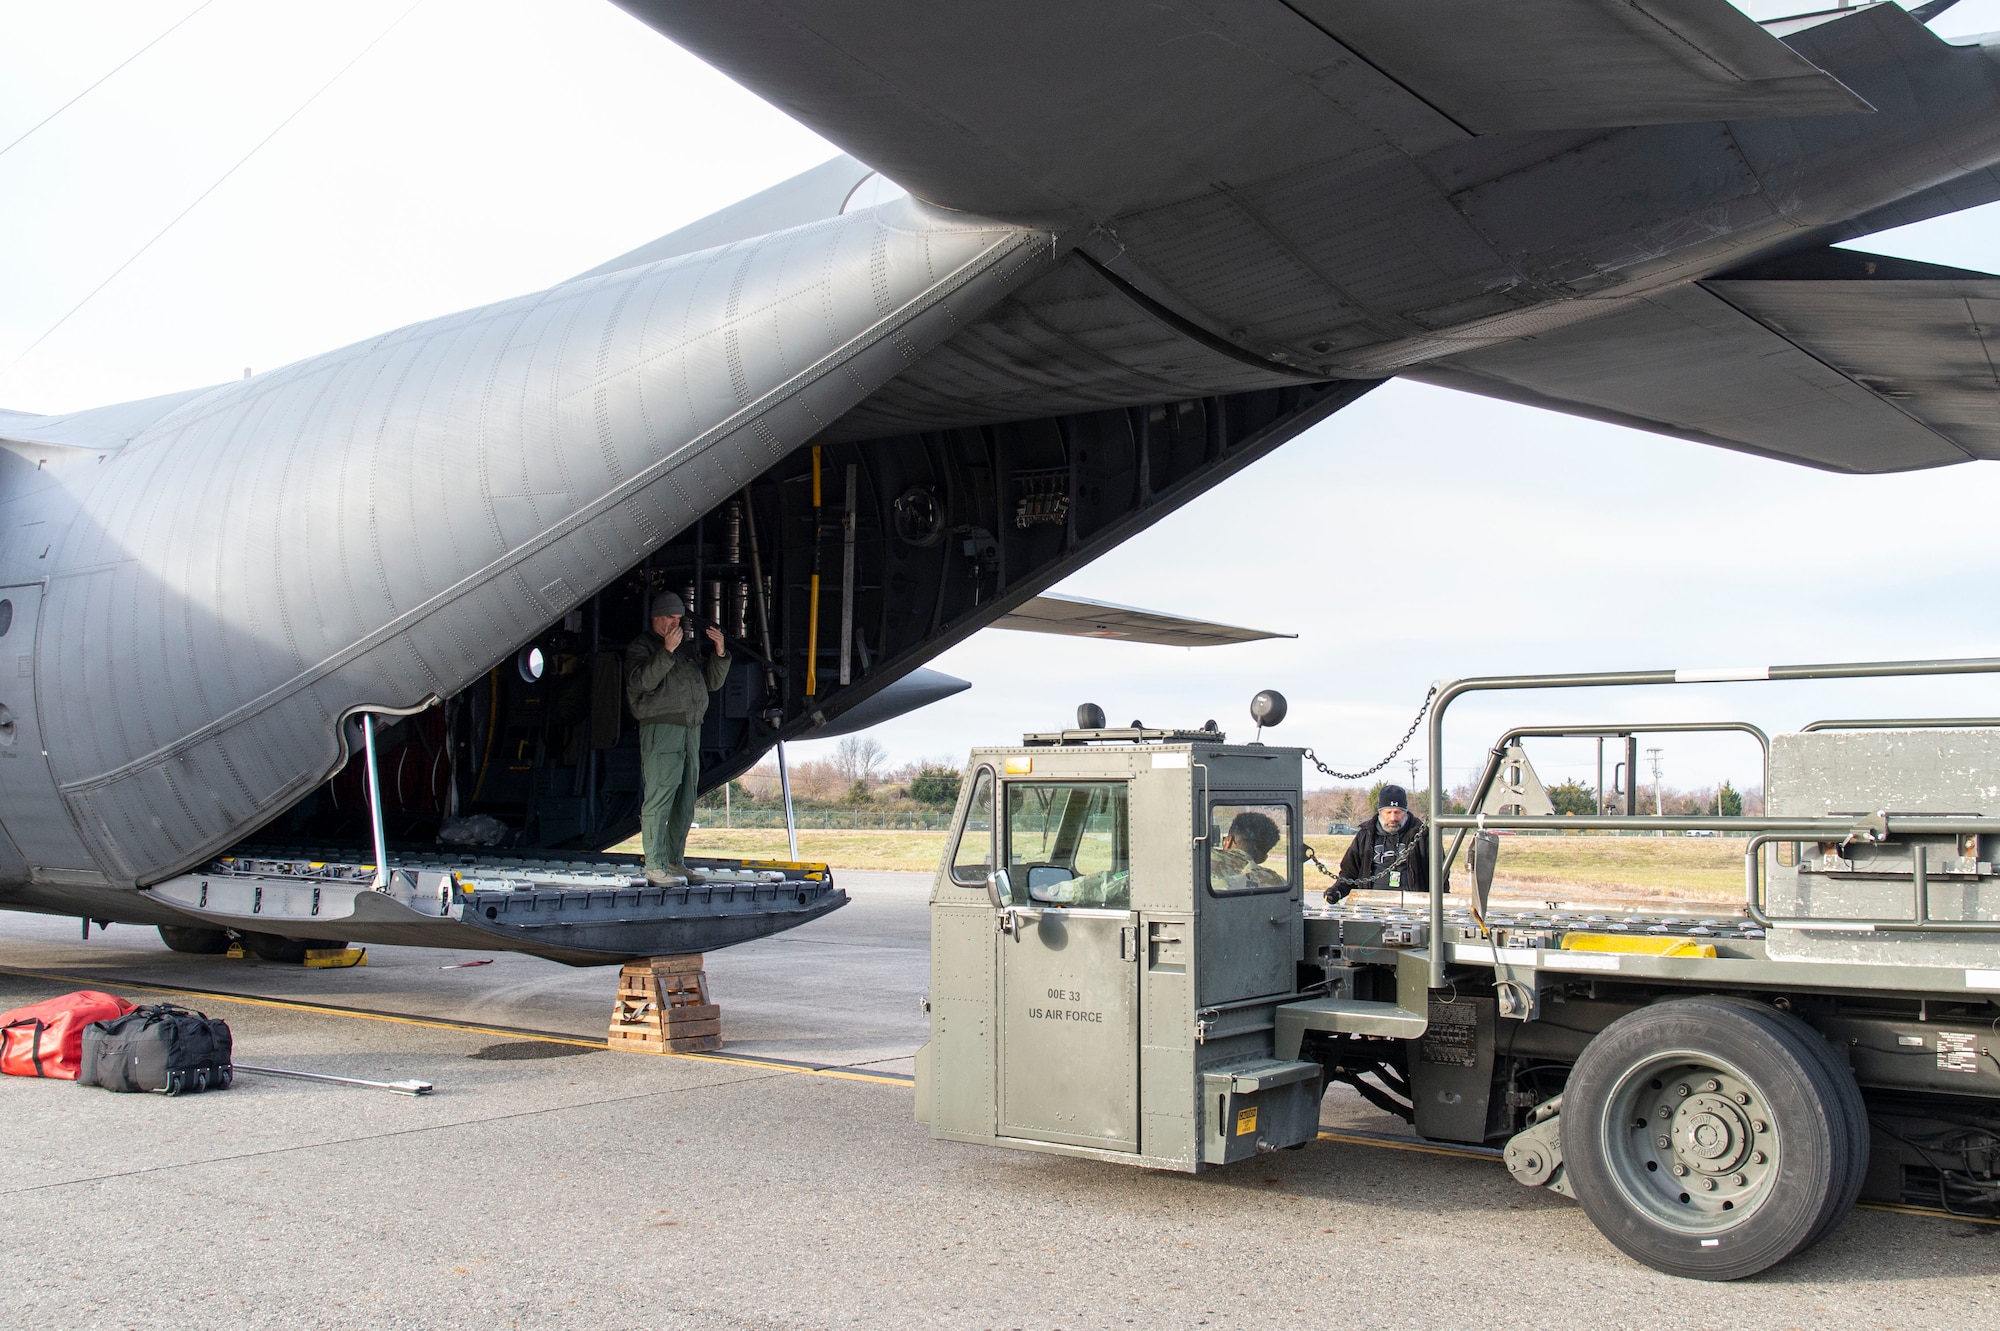 A Polish air force loadmaster marshals a cargo loader driven by a 436th Aerial Port Squadron ramp services load team member Dec. 7, 2021, at Dover Air Force Base, Delaware, during a foreign military sales mission. The United States and Poland have enjoyed decades-long warm bilateral relations. Poland is a stalwart NATO ally, and both the U.S. and Poland remain committed to the regional security and prosperity of Europe. Due to its strategic location, Dover AFB supports approximately $3.5 billion worth of foreign military sales annually. (U.S. Air Force photo by Roland Balik)